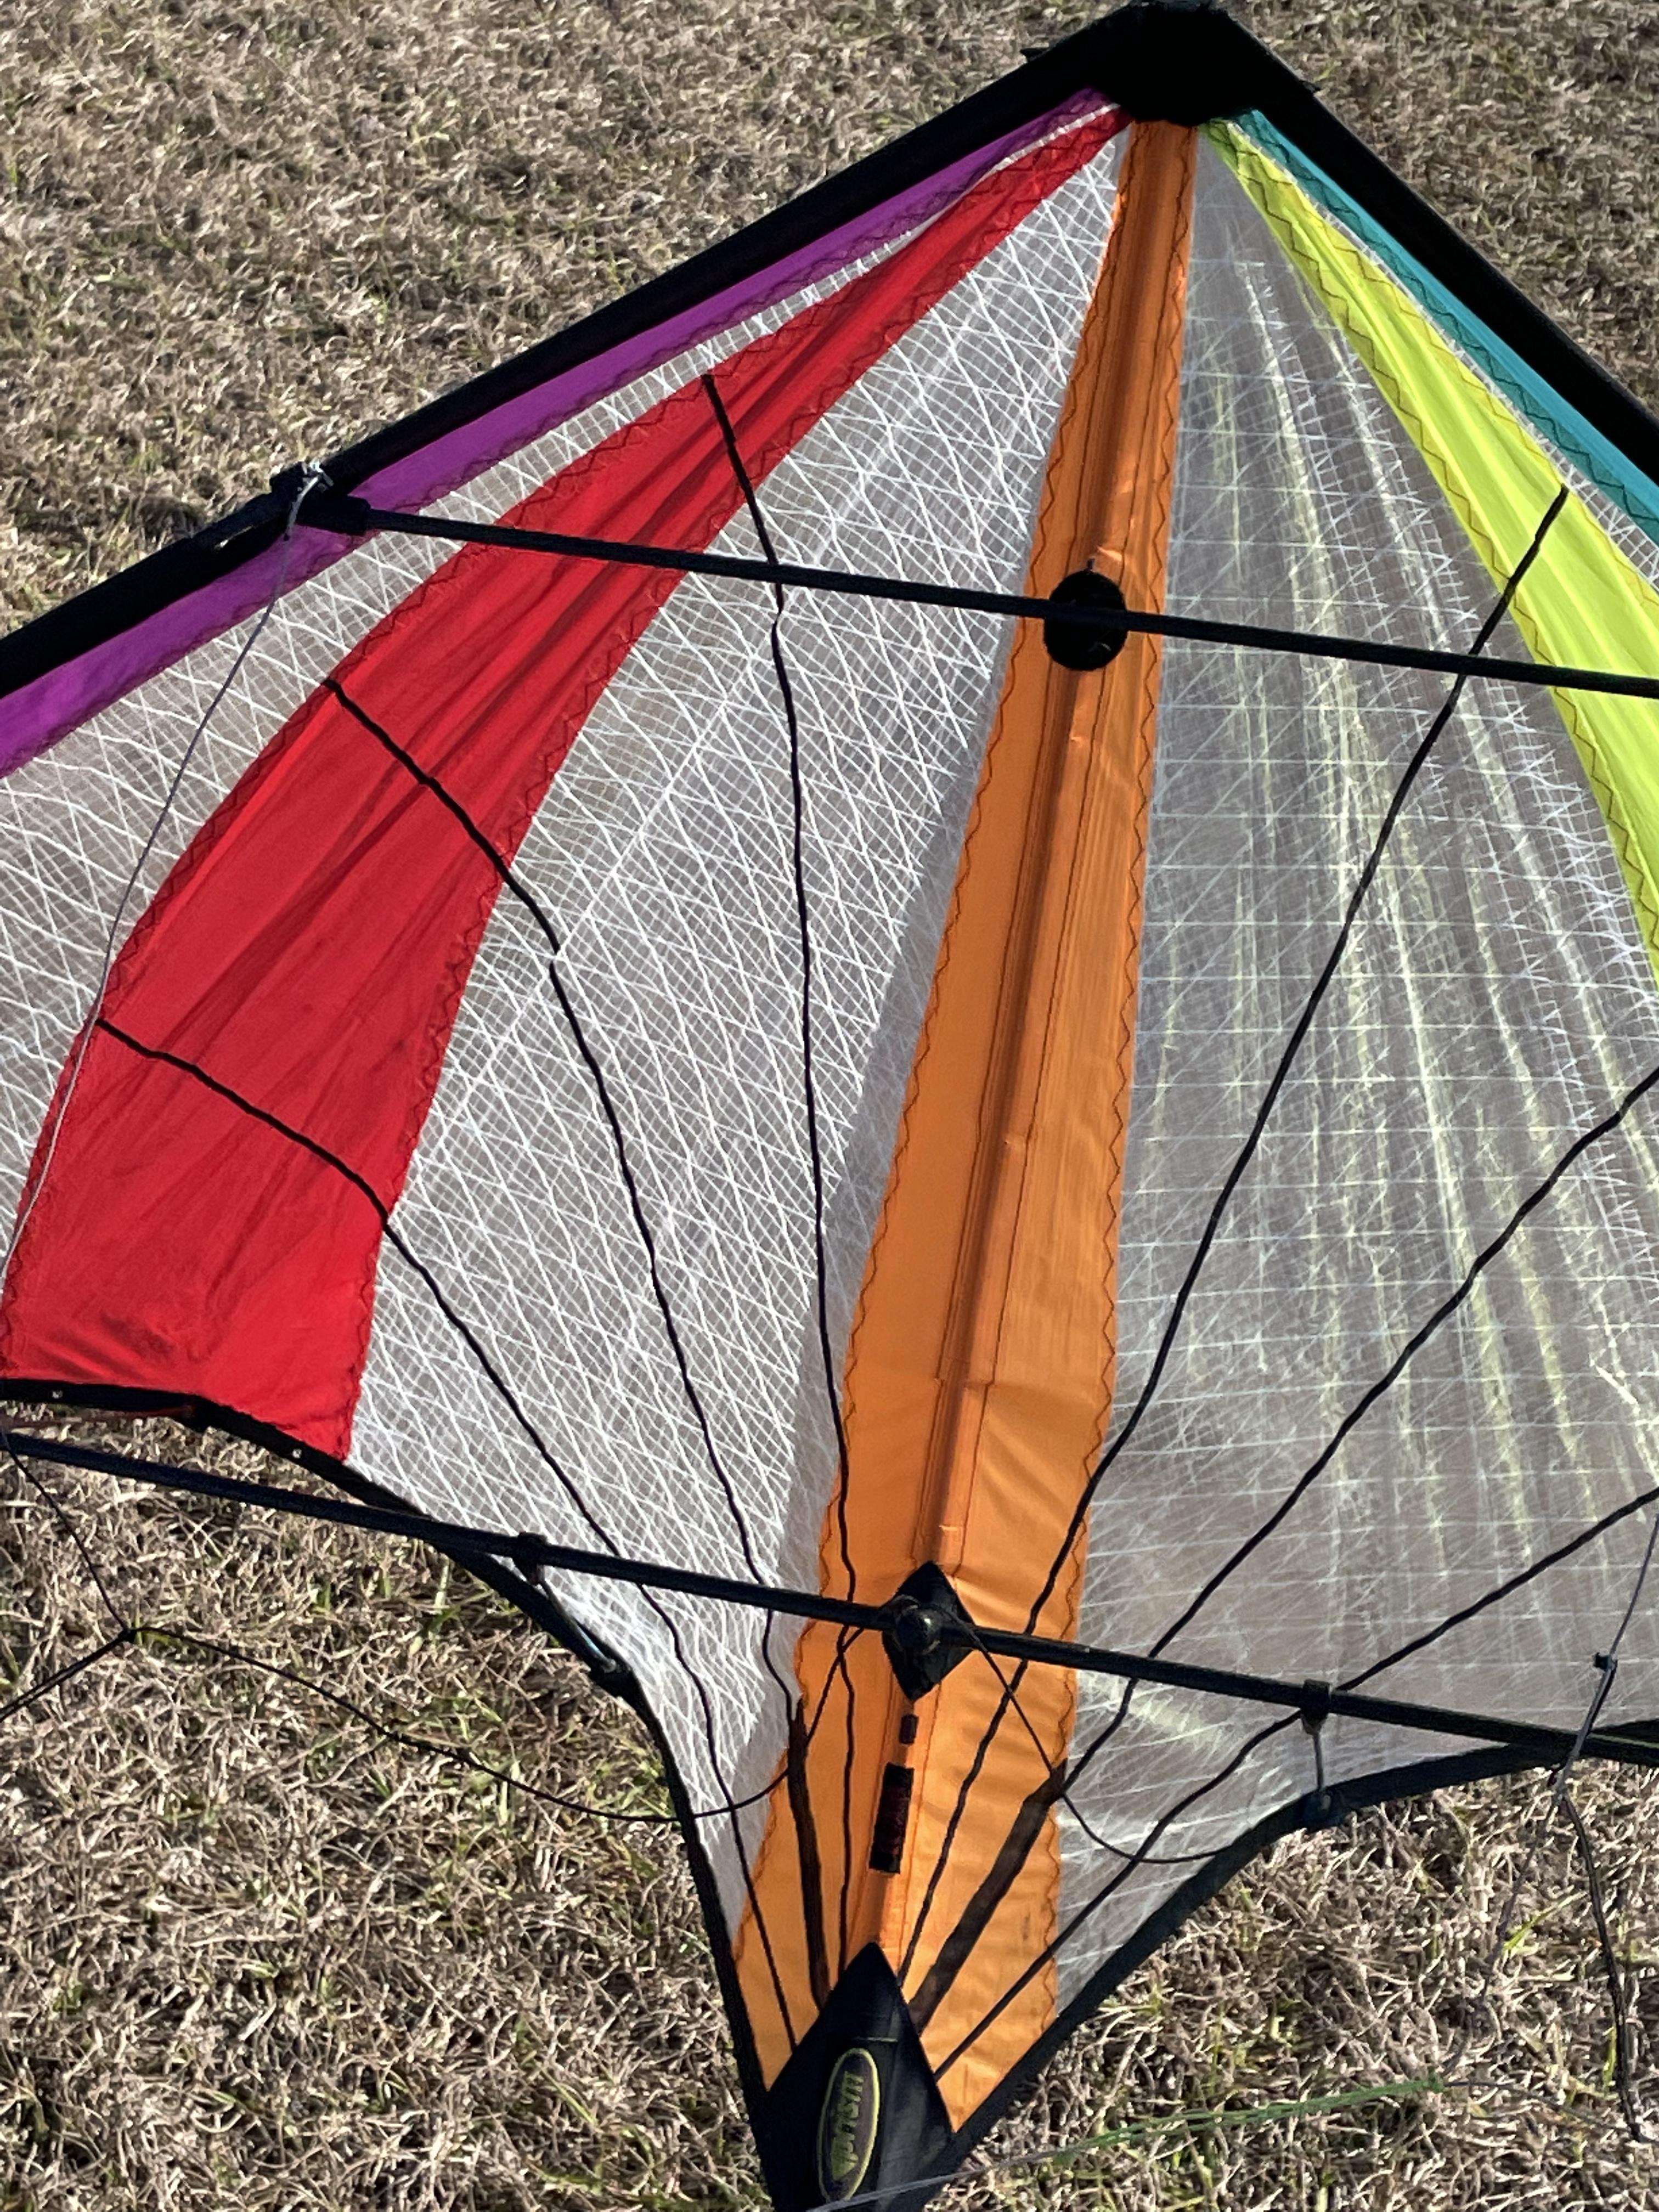 Looking for prism kites is eclipse sul and std ,vapor and fanatic